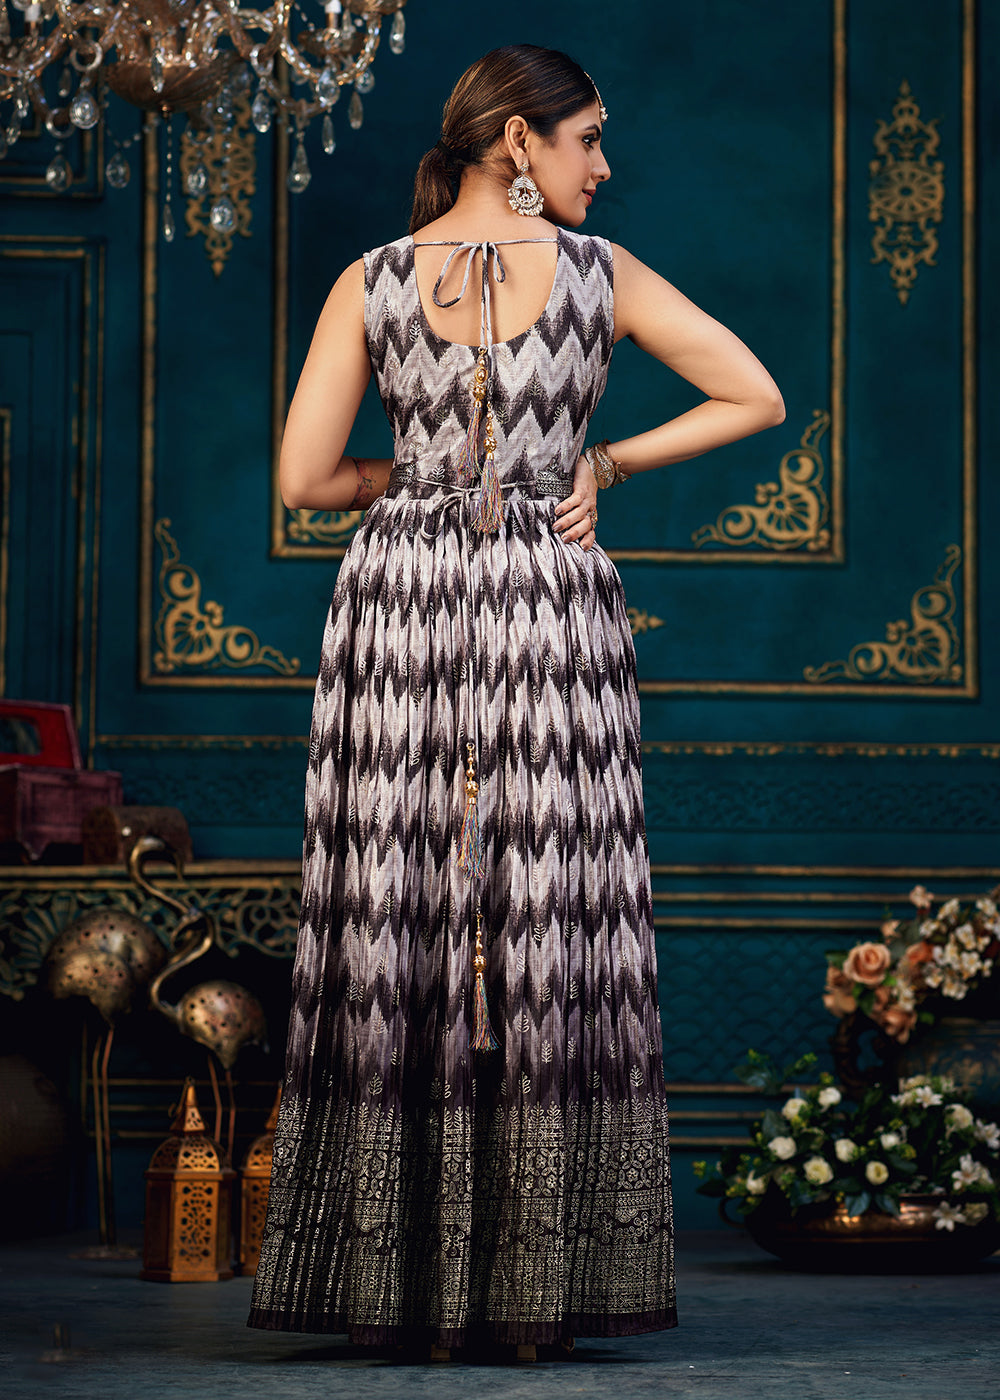 Buy Now Purple Multicolor Digital Foil Printed Ready to Wear Gown Online in USA, UK, Australia, New Zealand, Canada & Worldwide at Empress Clothing.